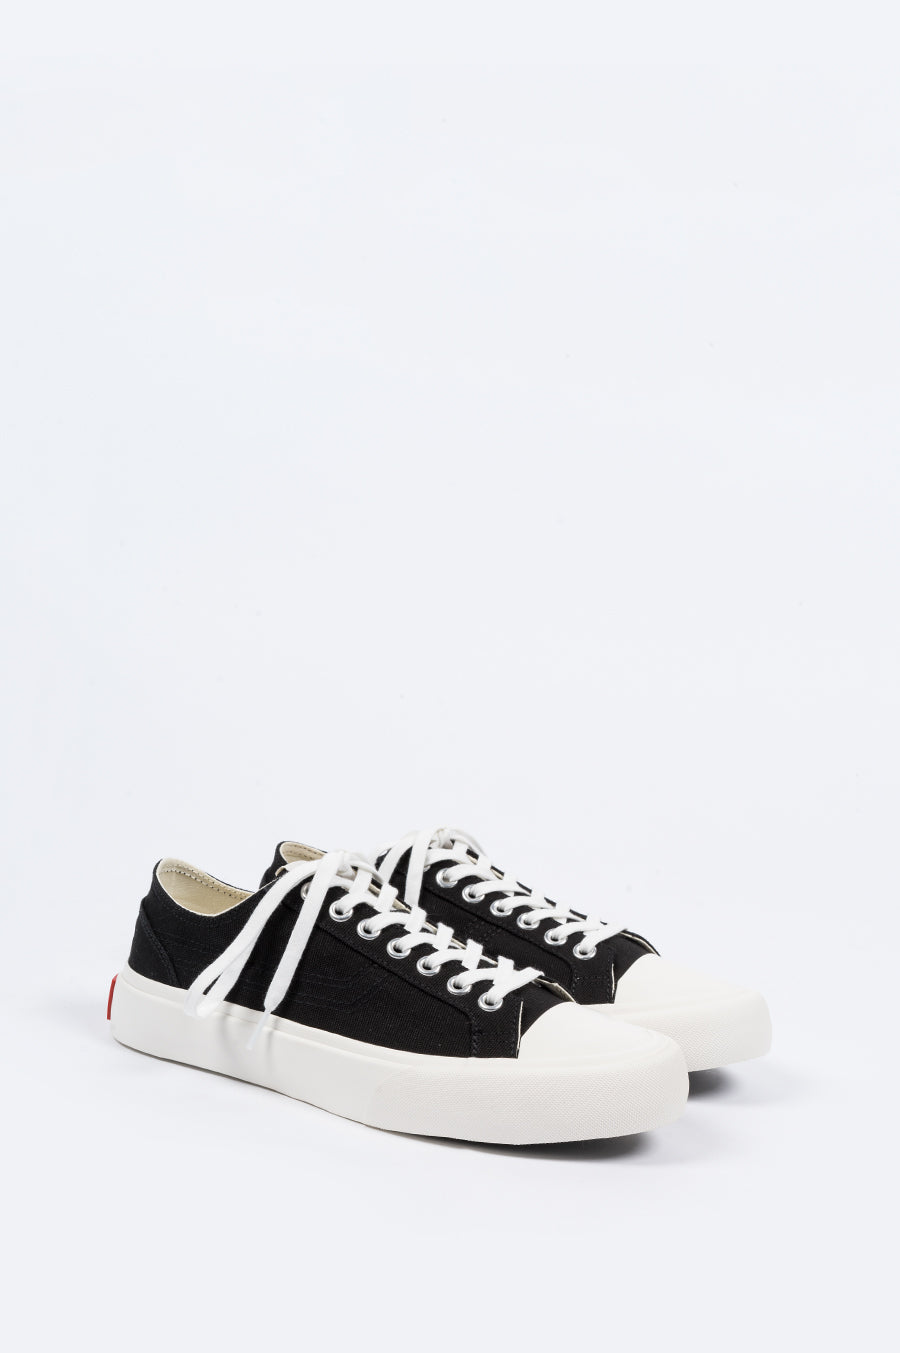 ARTICLE NUMBER 1007 LO TOP VULCANIZED SNEAKER BLACK - BLENDS